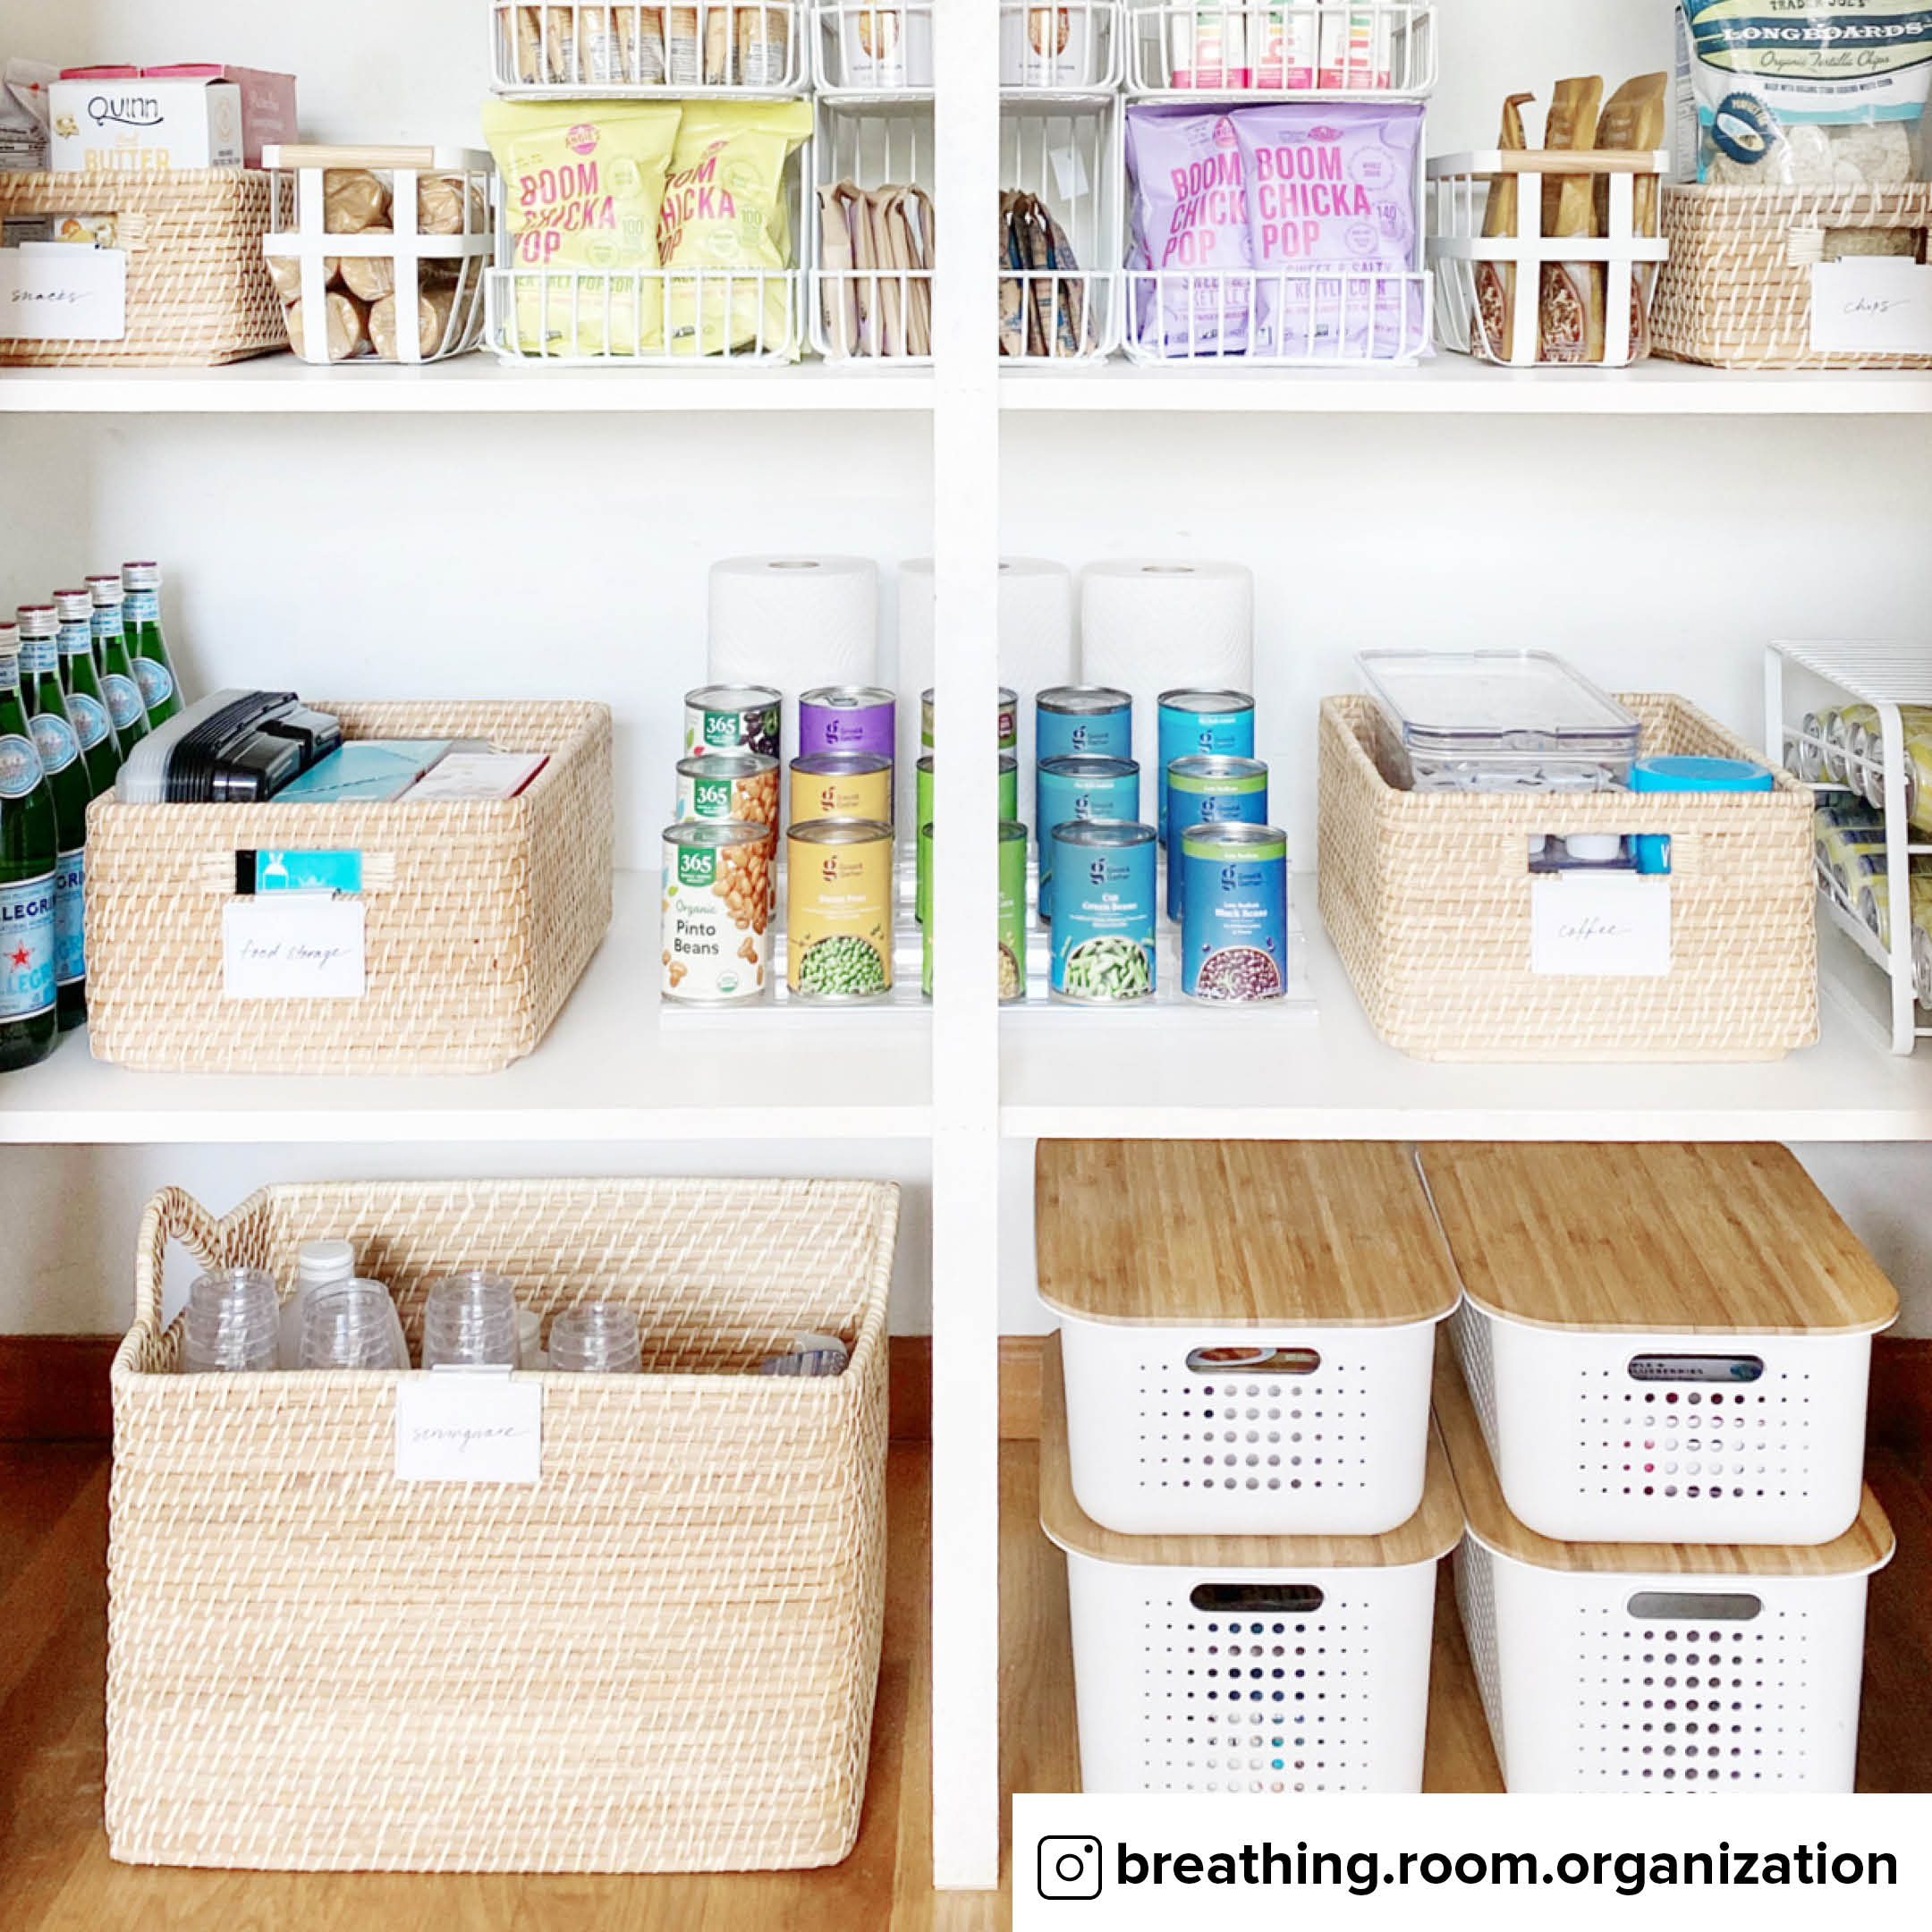 https://www.containerstore.com/catalogimages/412710/@breathing.room.organization_Afterli.jpg